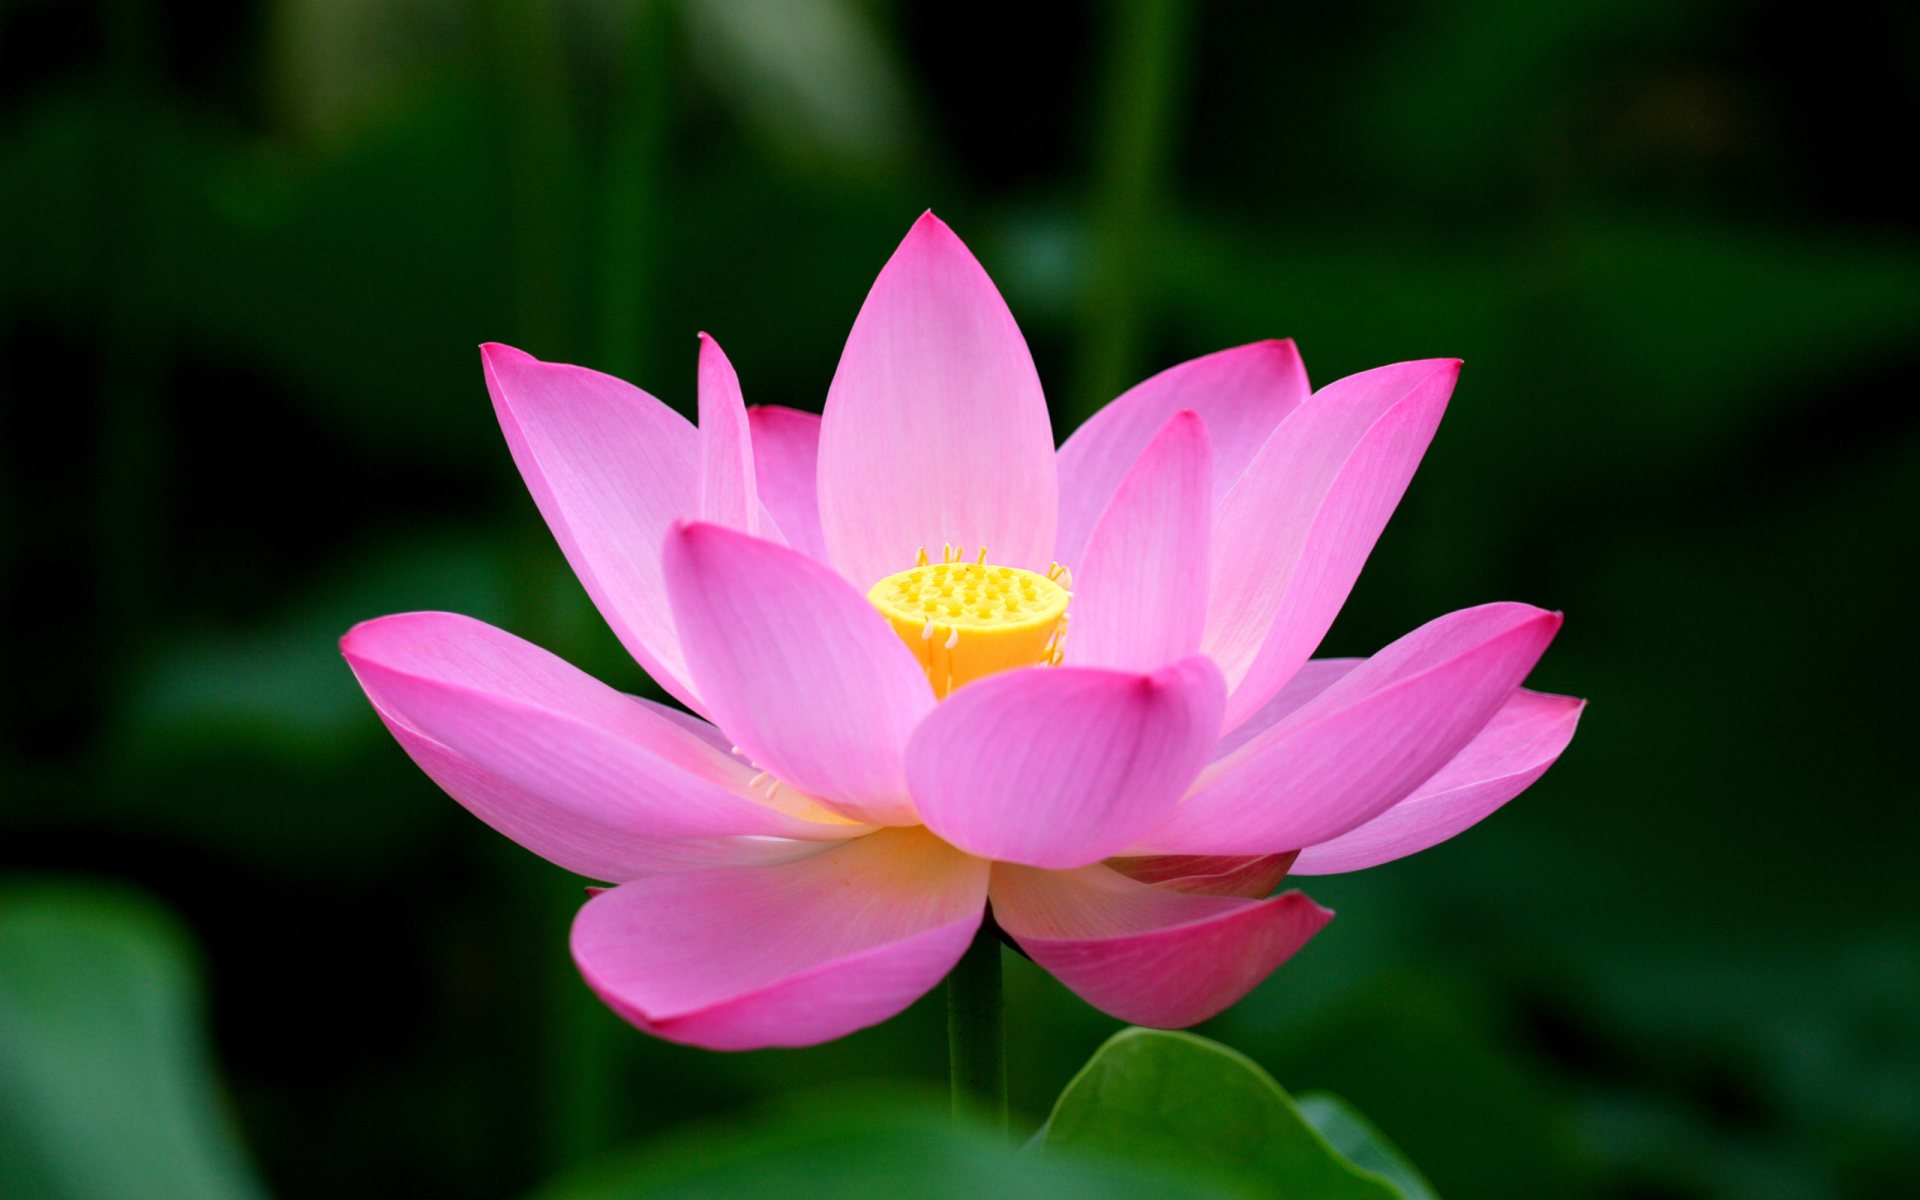 The lotus is a spiritual symbol in many religions and cultures, and some of its meanings signify spiritual development, creation, purity and rebirth.